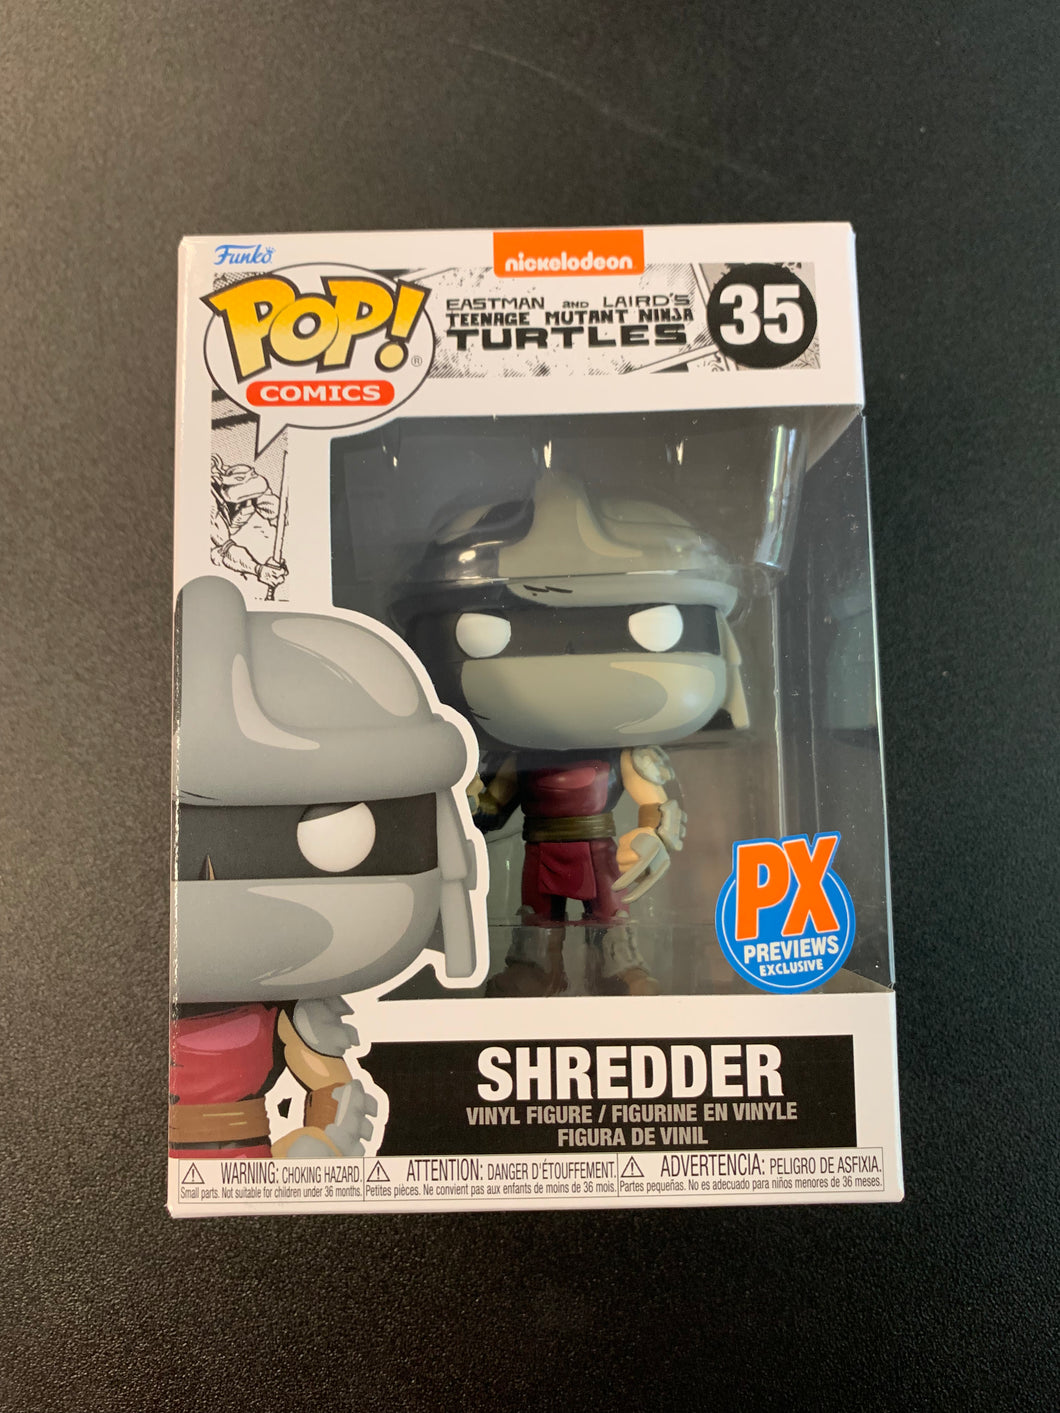 FUNKO POP COMICS NICKELODEON EASTMAN AND LAIRD’S TMNT SHREDDER PX PREVIEWS EXCLUSIVE 35